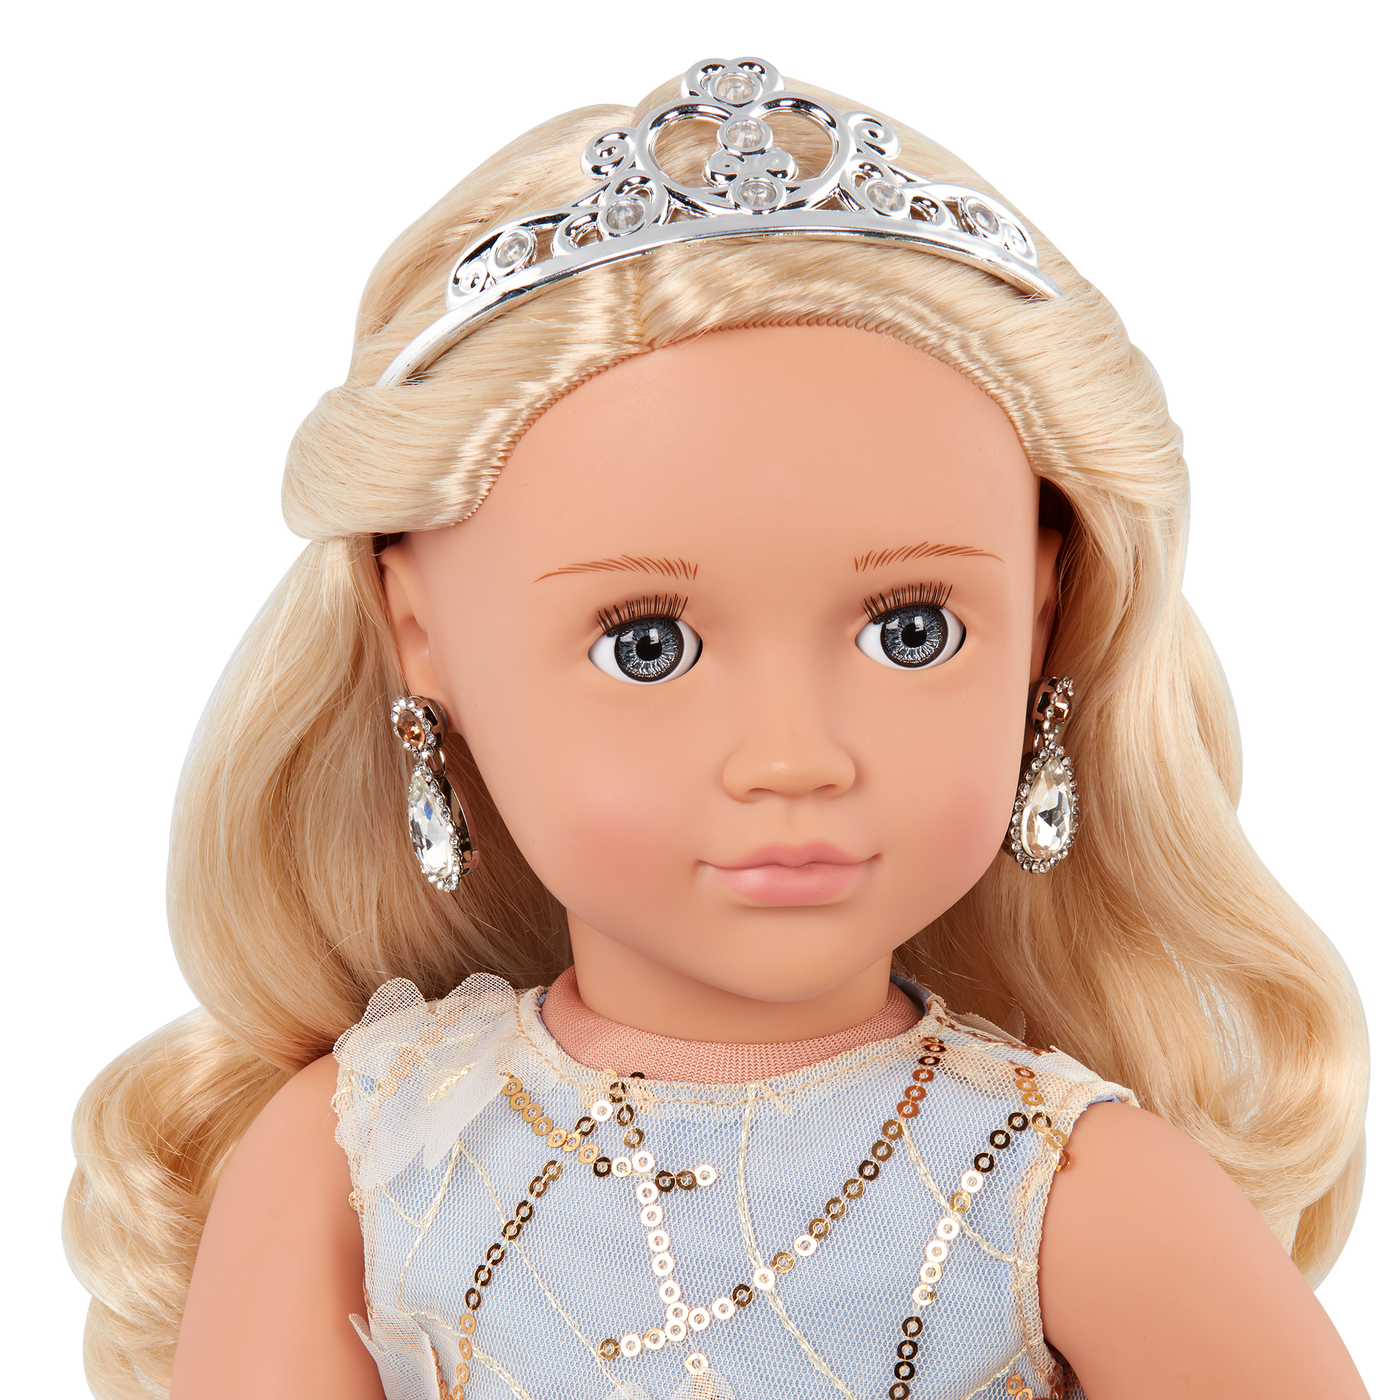 Our Generation 18-inch Special Event Doll Ellory